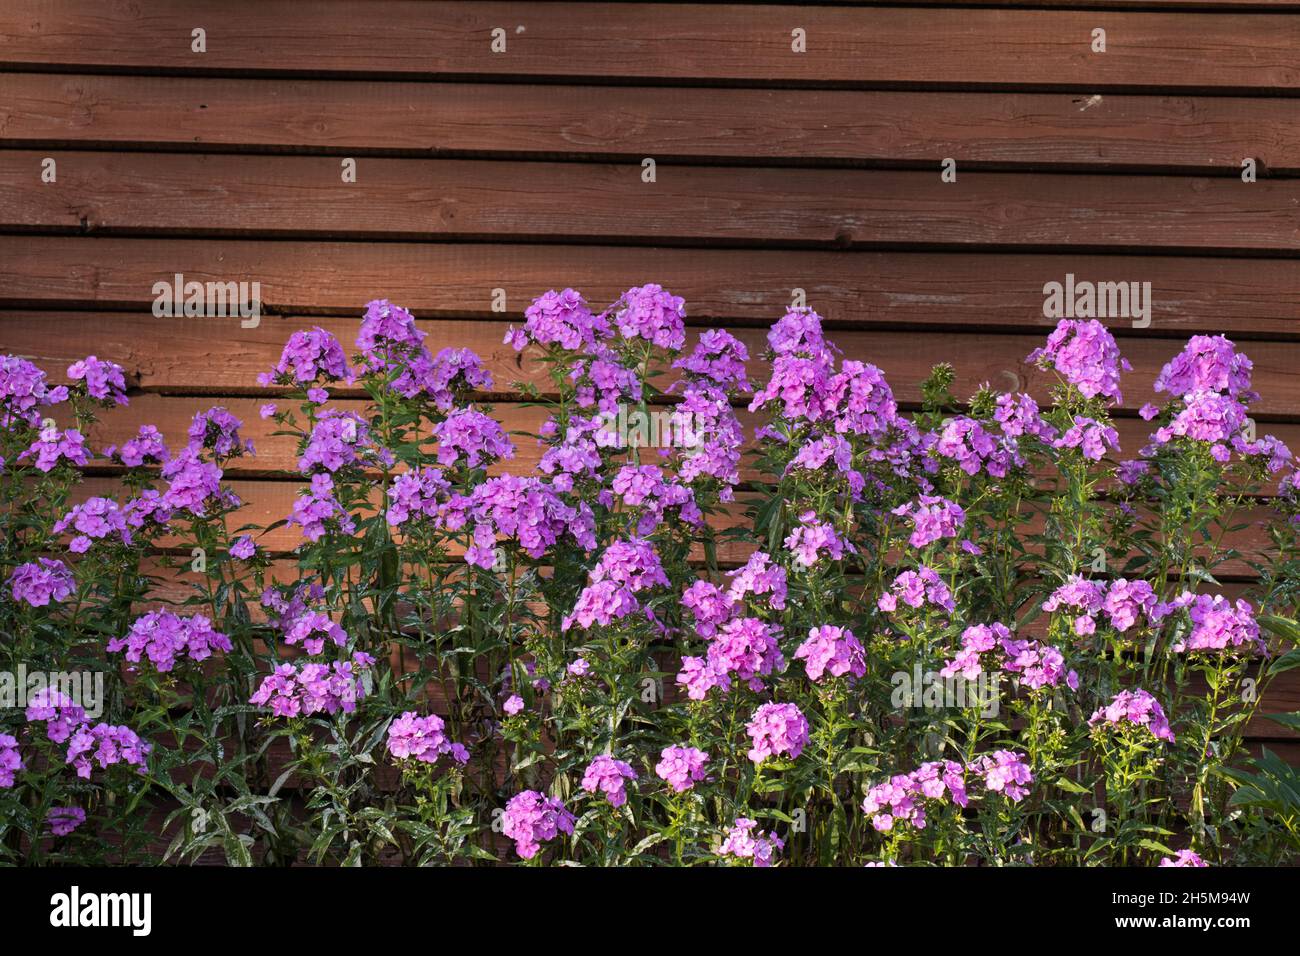 Pinkish Phloxes by a reddish wooden wall in European garden. Stock Photo